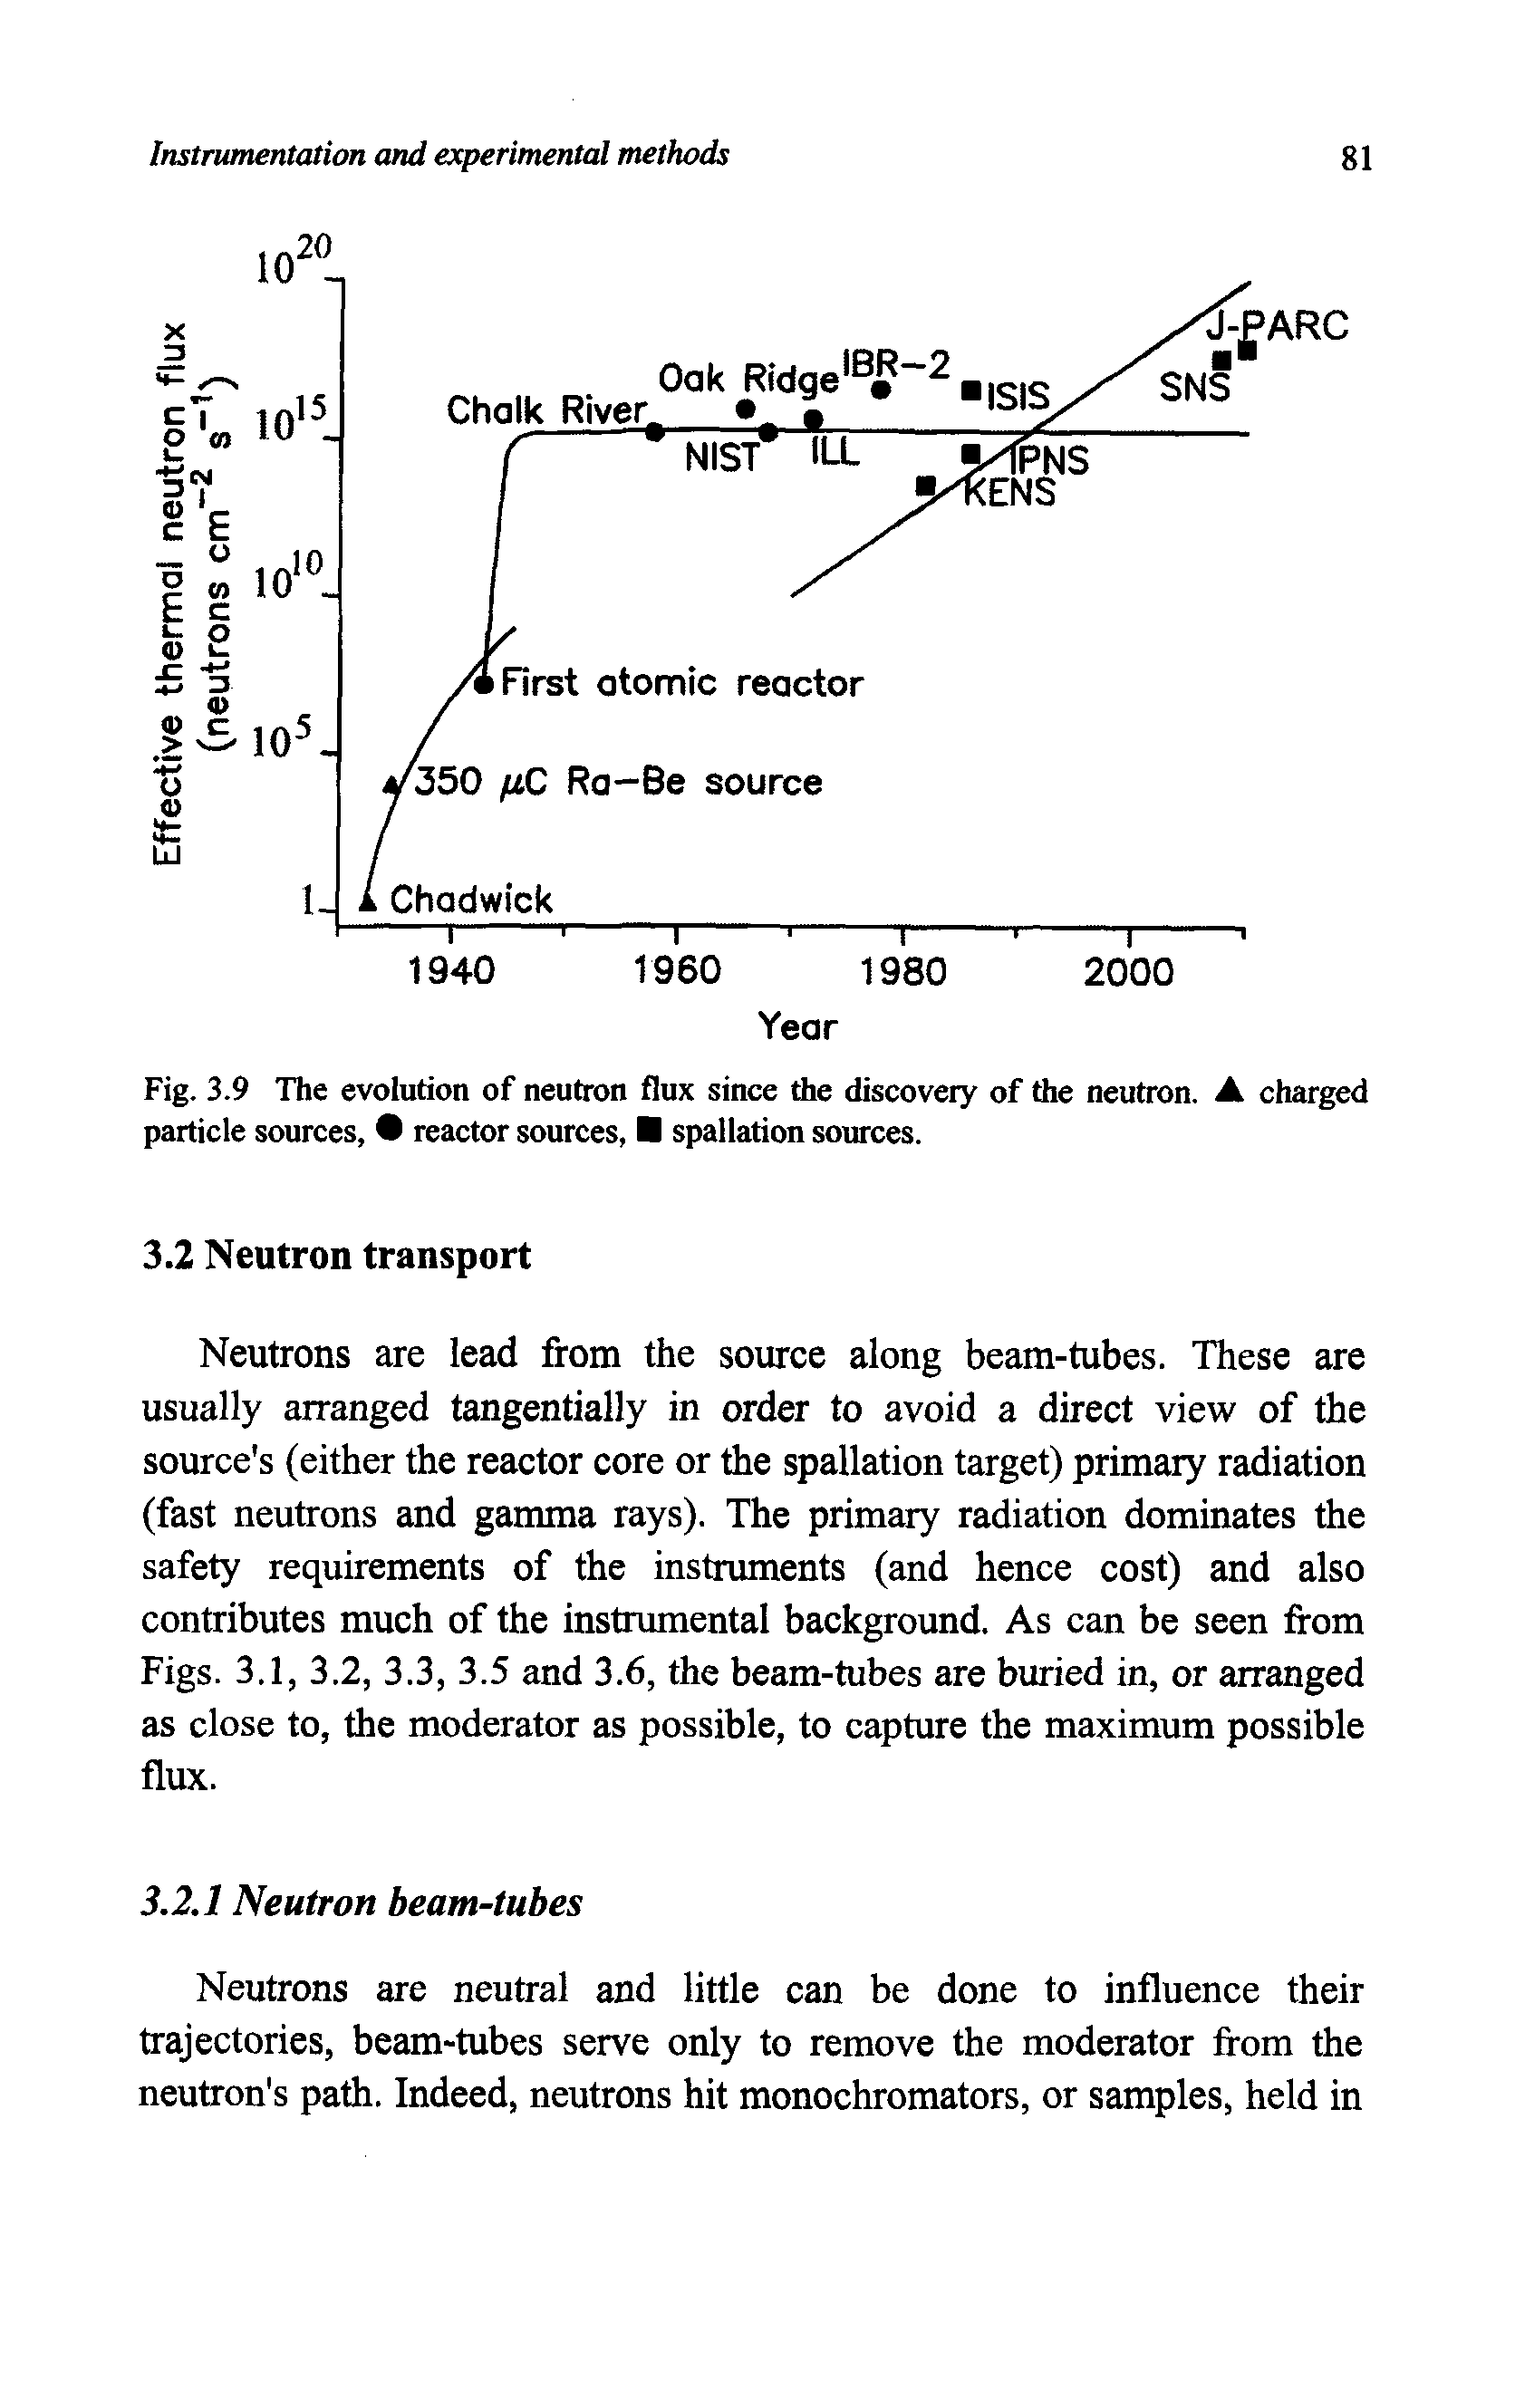 Fig. 3.9 The evolution of neutron flux since the discovery of the neutron. A charged particle sources, reactor sources, spallation sources.